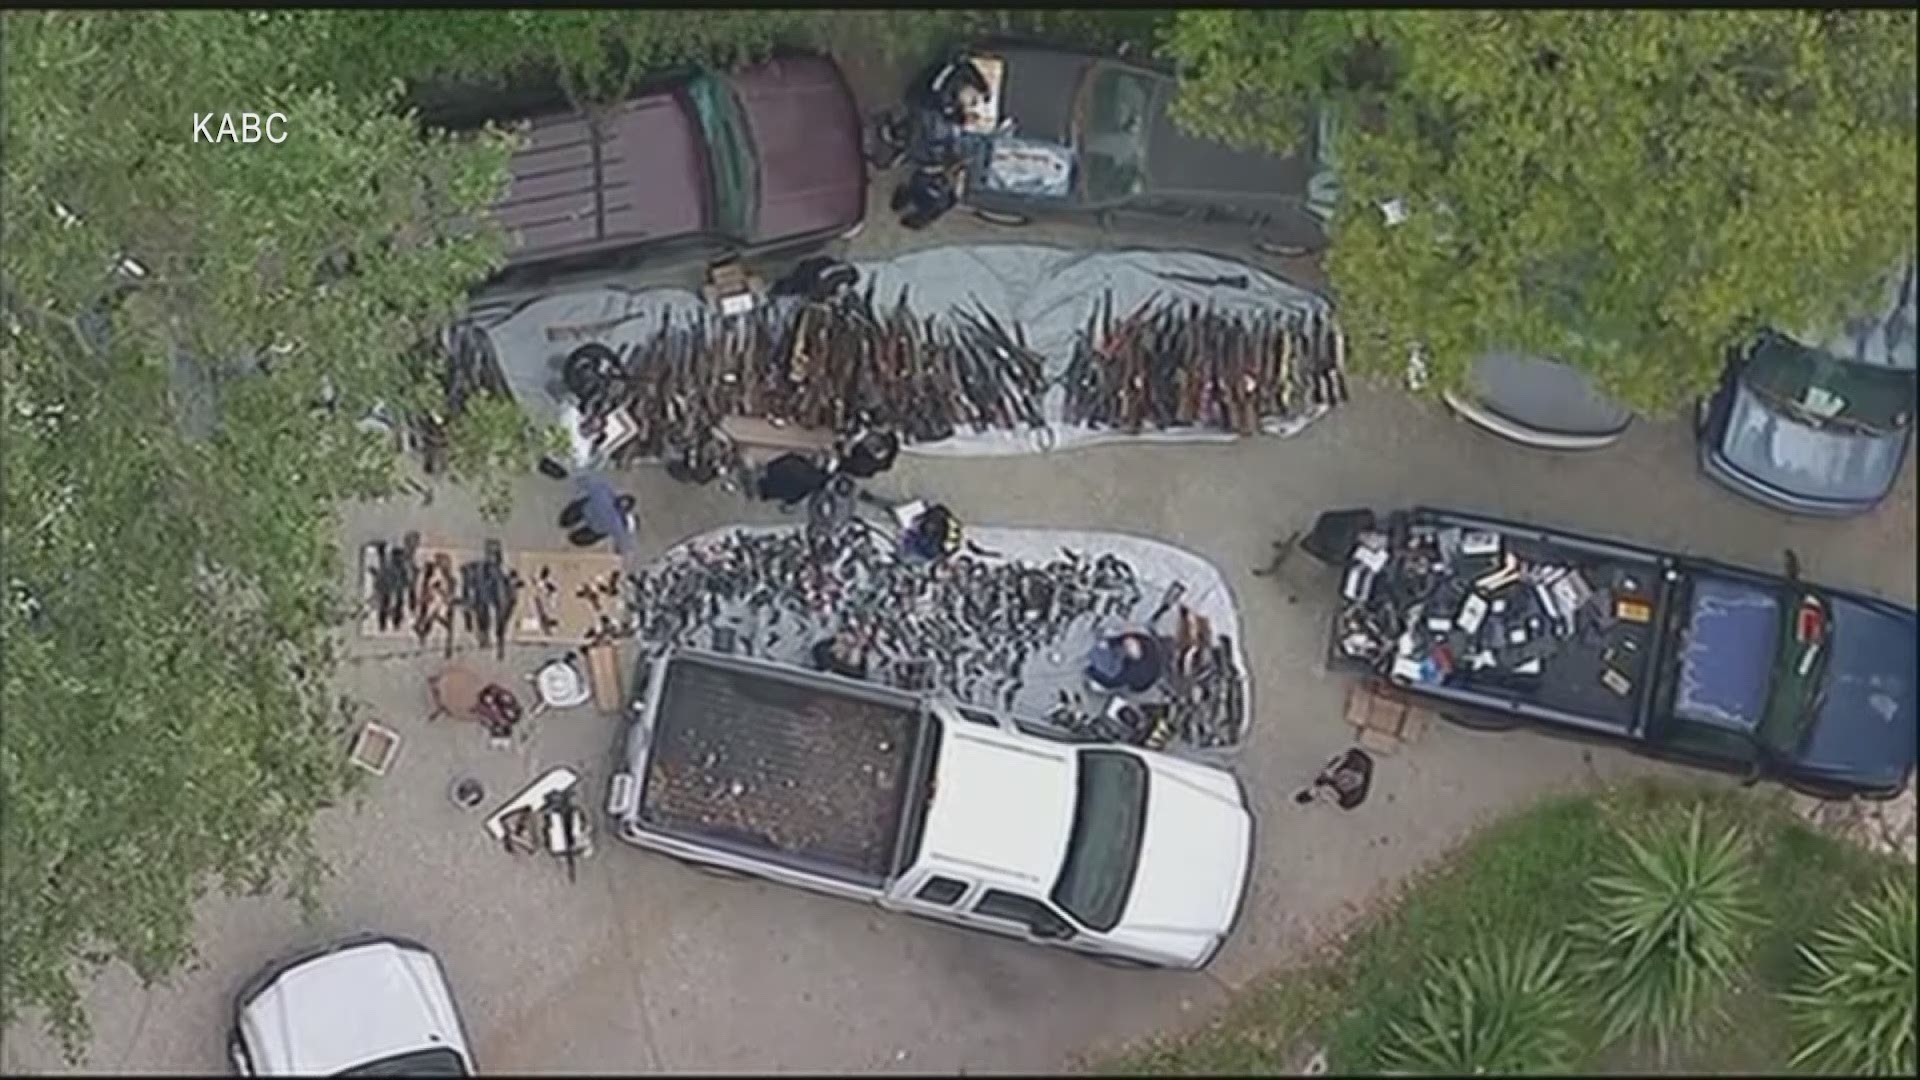 Authorities seized more than a thousand guns from a large Los Angeles home after getting an anonymous tip regarding illegal firearms sales. (KABC via AP)